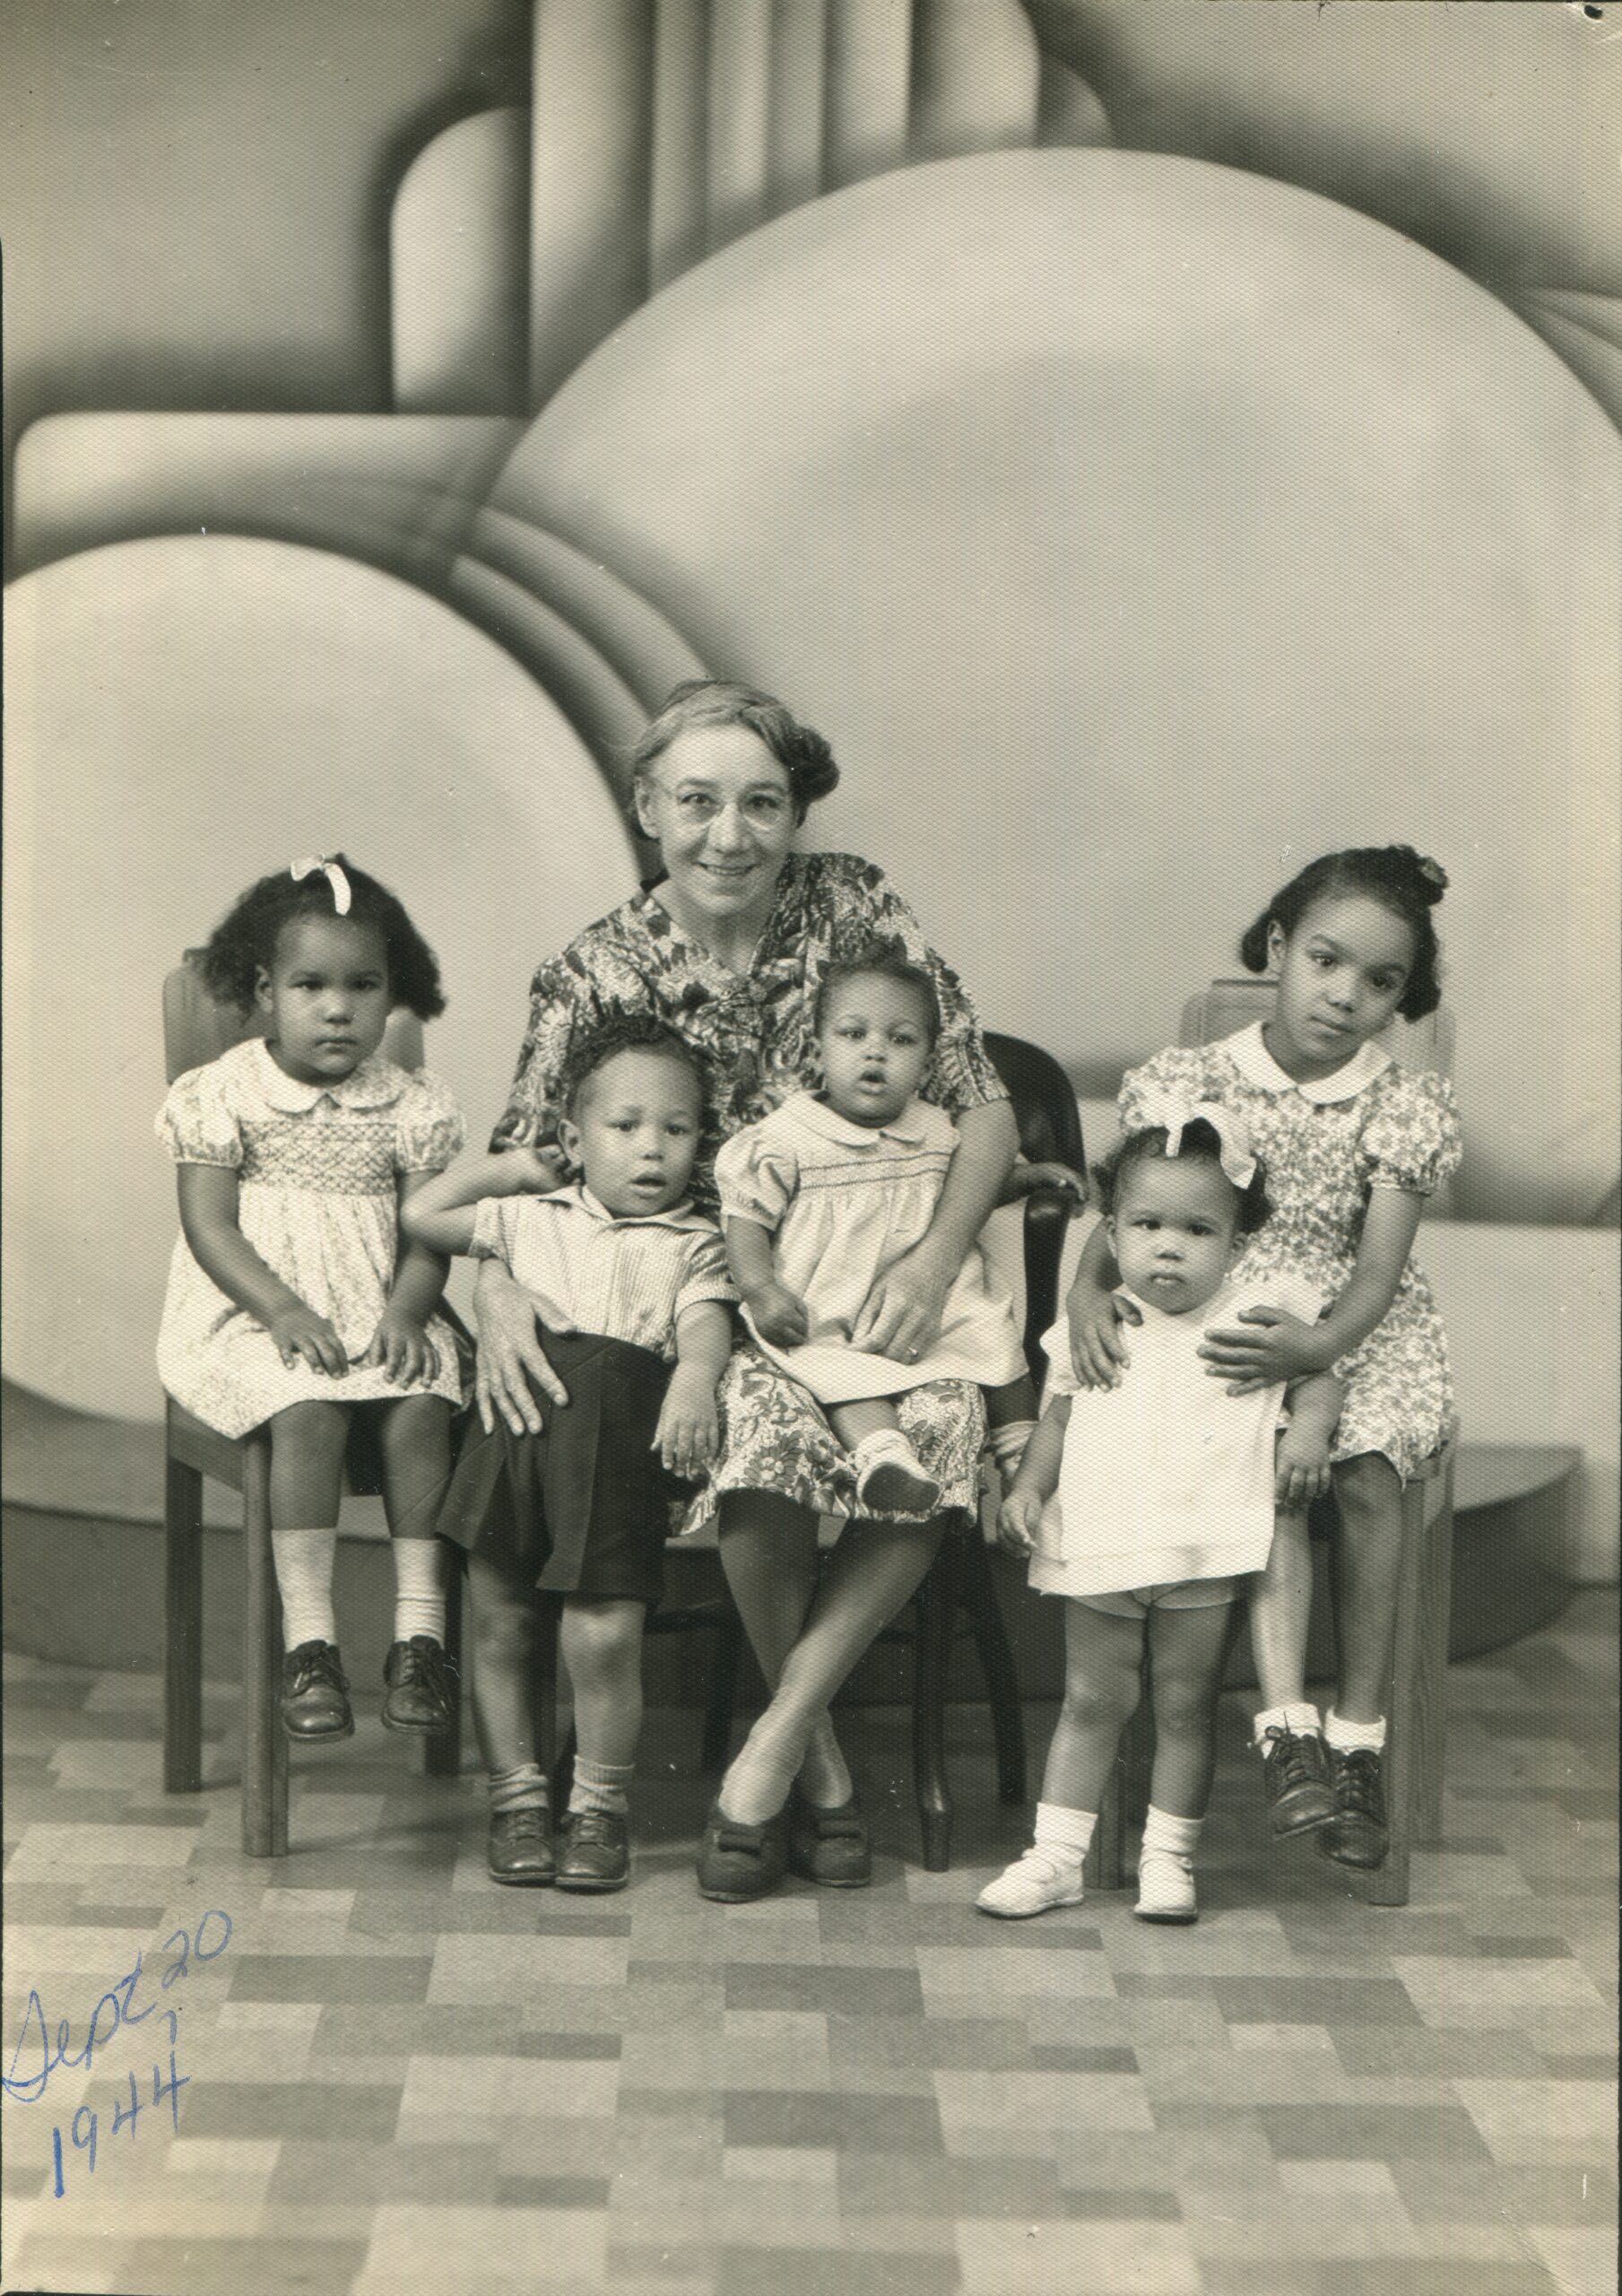 Emily Aida Collins and her grandchildren, 1944. Reference code: AM1688-S1-F5-: 2021-034.154